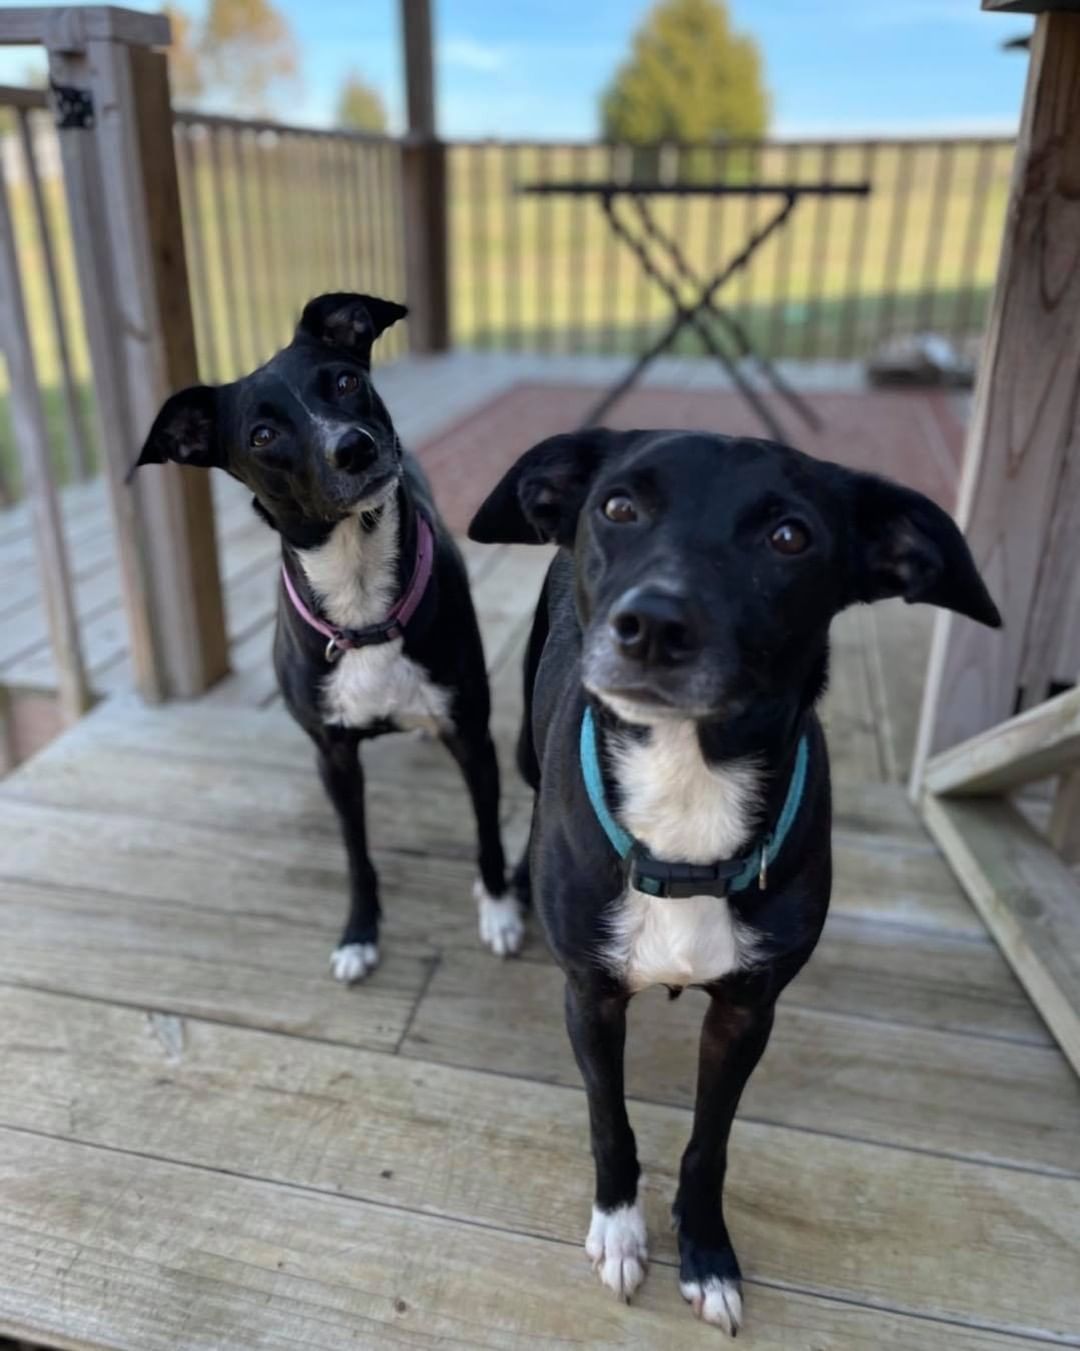 Daily Double, anyone? 🤩

Sally and Lilly, a pair of bonded sisters, are 5 years old, 27lbs a piece, and resemble Lab mixes. 🧬 These sweet girls found themselves in need of a new home after their elderly owner could no longer care for them. 💔 Now, they’re searching for a home together! 👯‍♀️ Both girls are house trained and know how to walk on leash, but aren’t used to being crated. Sweet and social, they’re appropriate for a home with kids 5+, other dogs, and/or savvy cats. 😻

Their foster says, 💬 “They love each other. They're always together. They like playing with tennis balls and chasing each other around the yard. They seem to be well trained in that they won't walk in front of you down stairs. They always seem to wait for a verbal cue to come through or down. Sally seems to like all treats and Lilly is a little hesitant. They're two very special girls and I'm so glad they will be together!